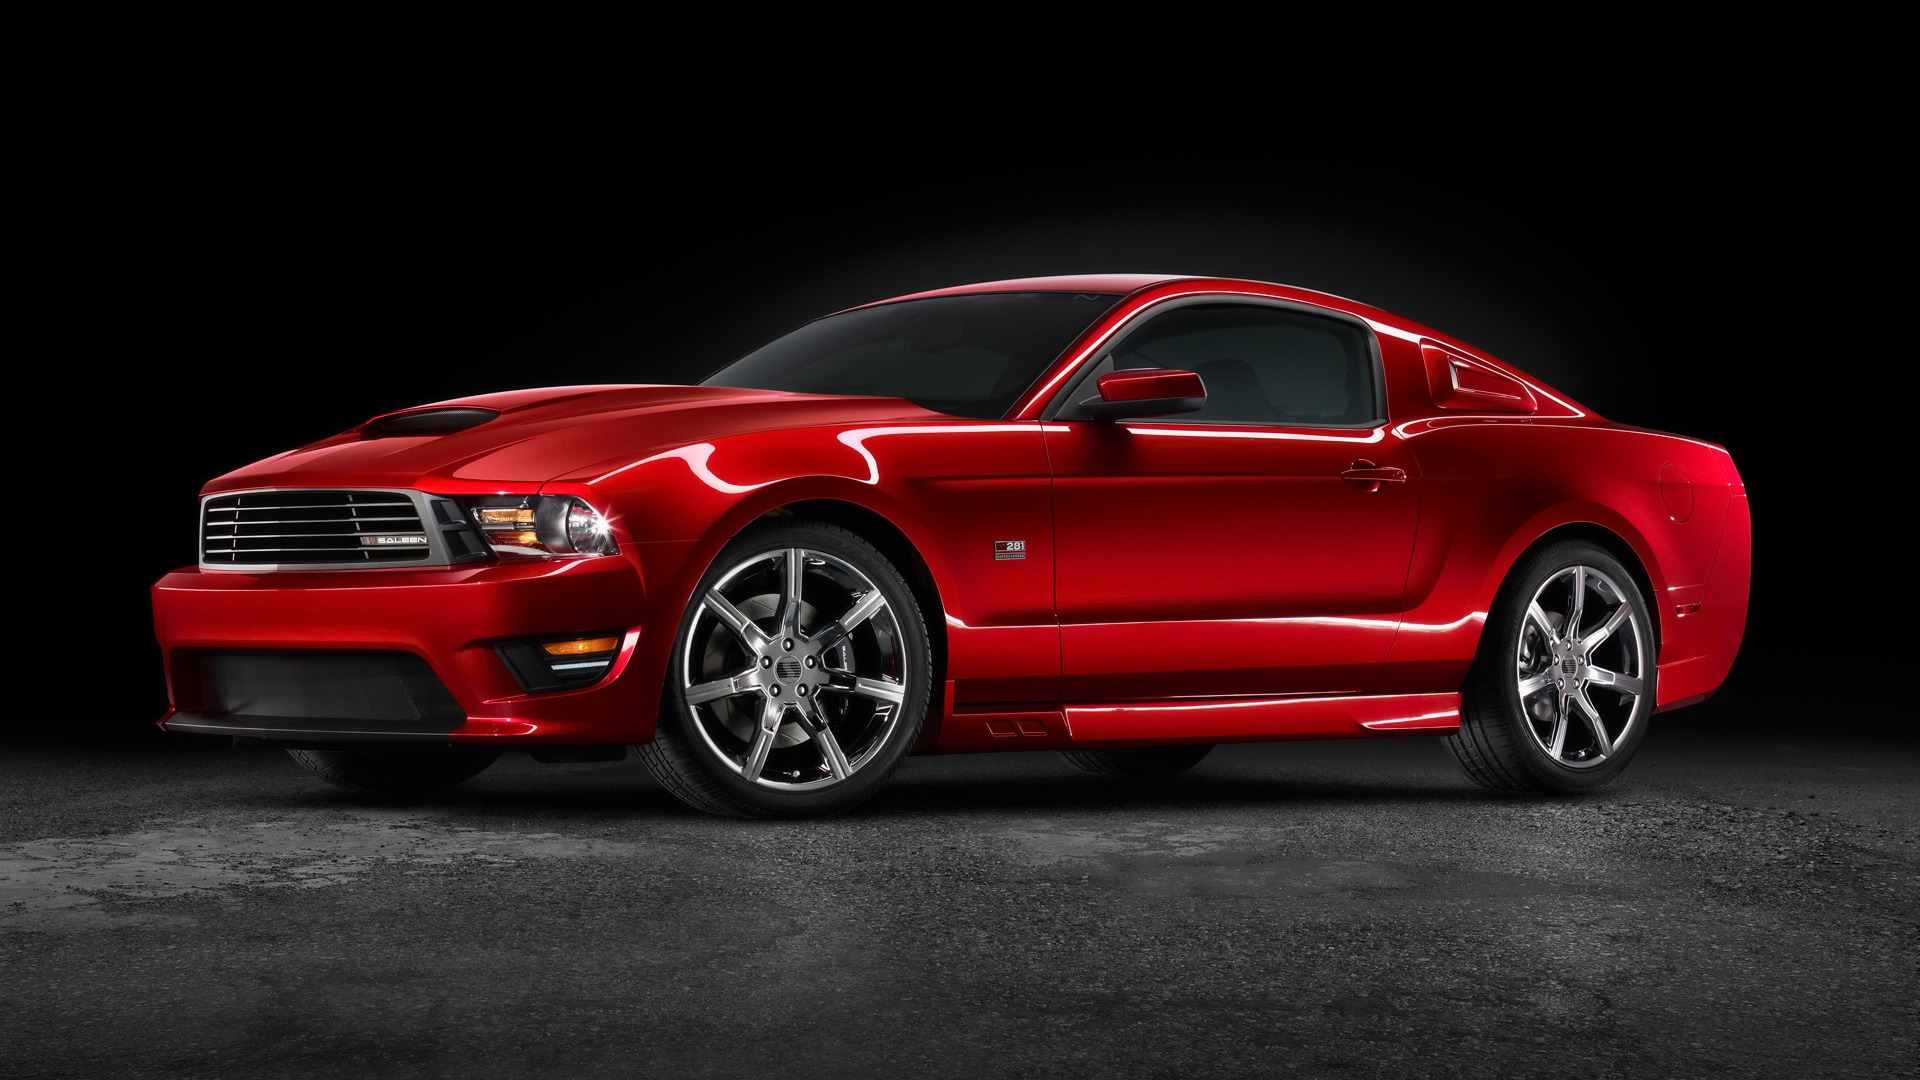 Saleen Ford Mustang S281 Wallpaper Cars In